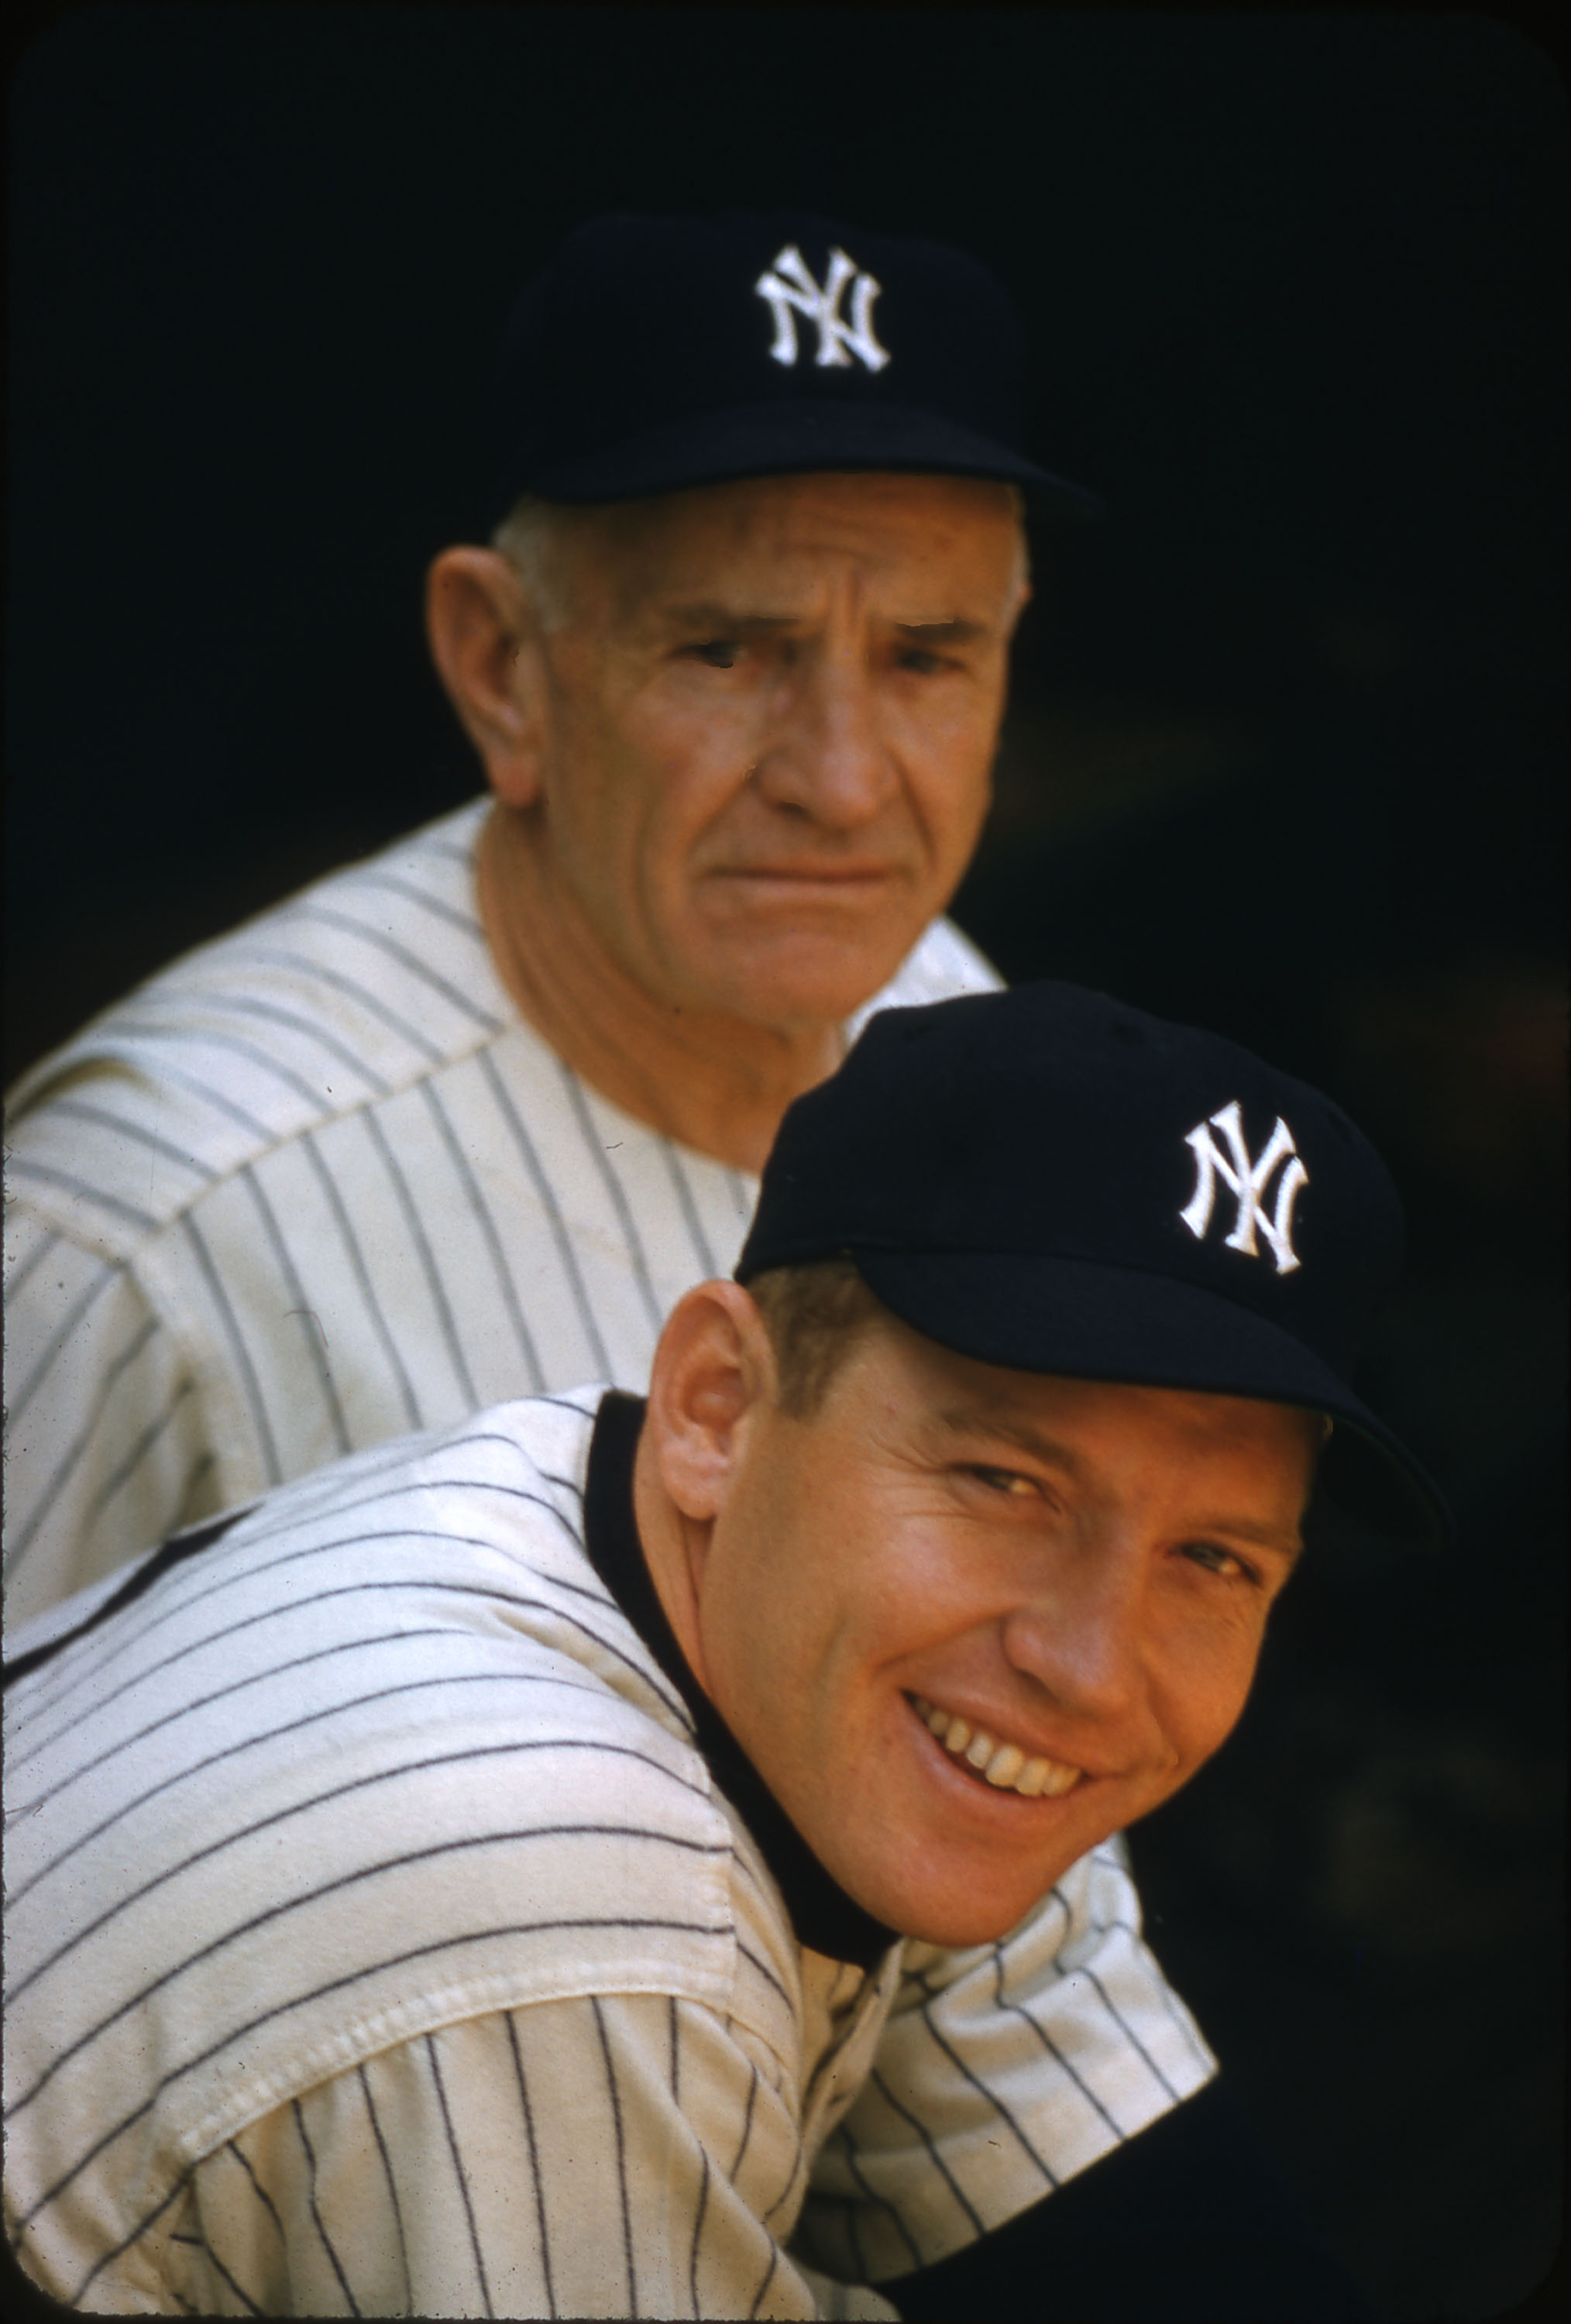 Photo of baseball player Mickey Mantle, looking at the camera and smiling with a wide, bright smile. Another man stands behind him, looking at him smiling to the camera. They both wear Yankees uniforms with dark colored caps with white Yankees logos, and white tops with dark, thin vertical pinstripes. 